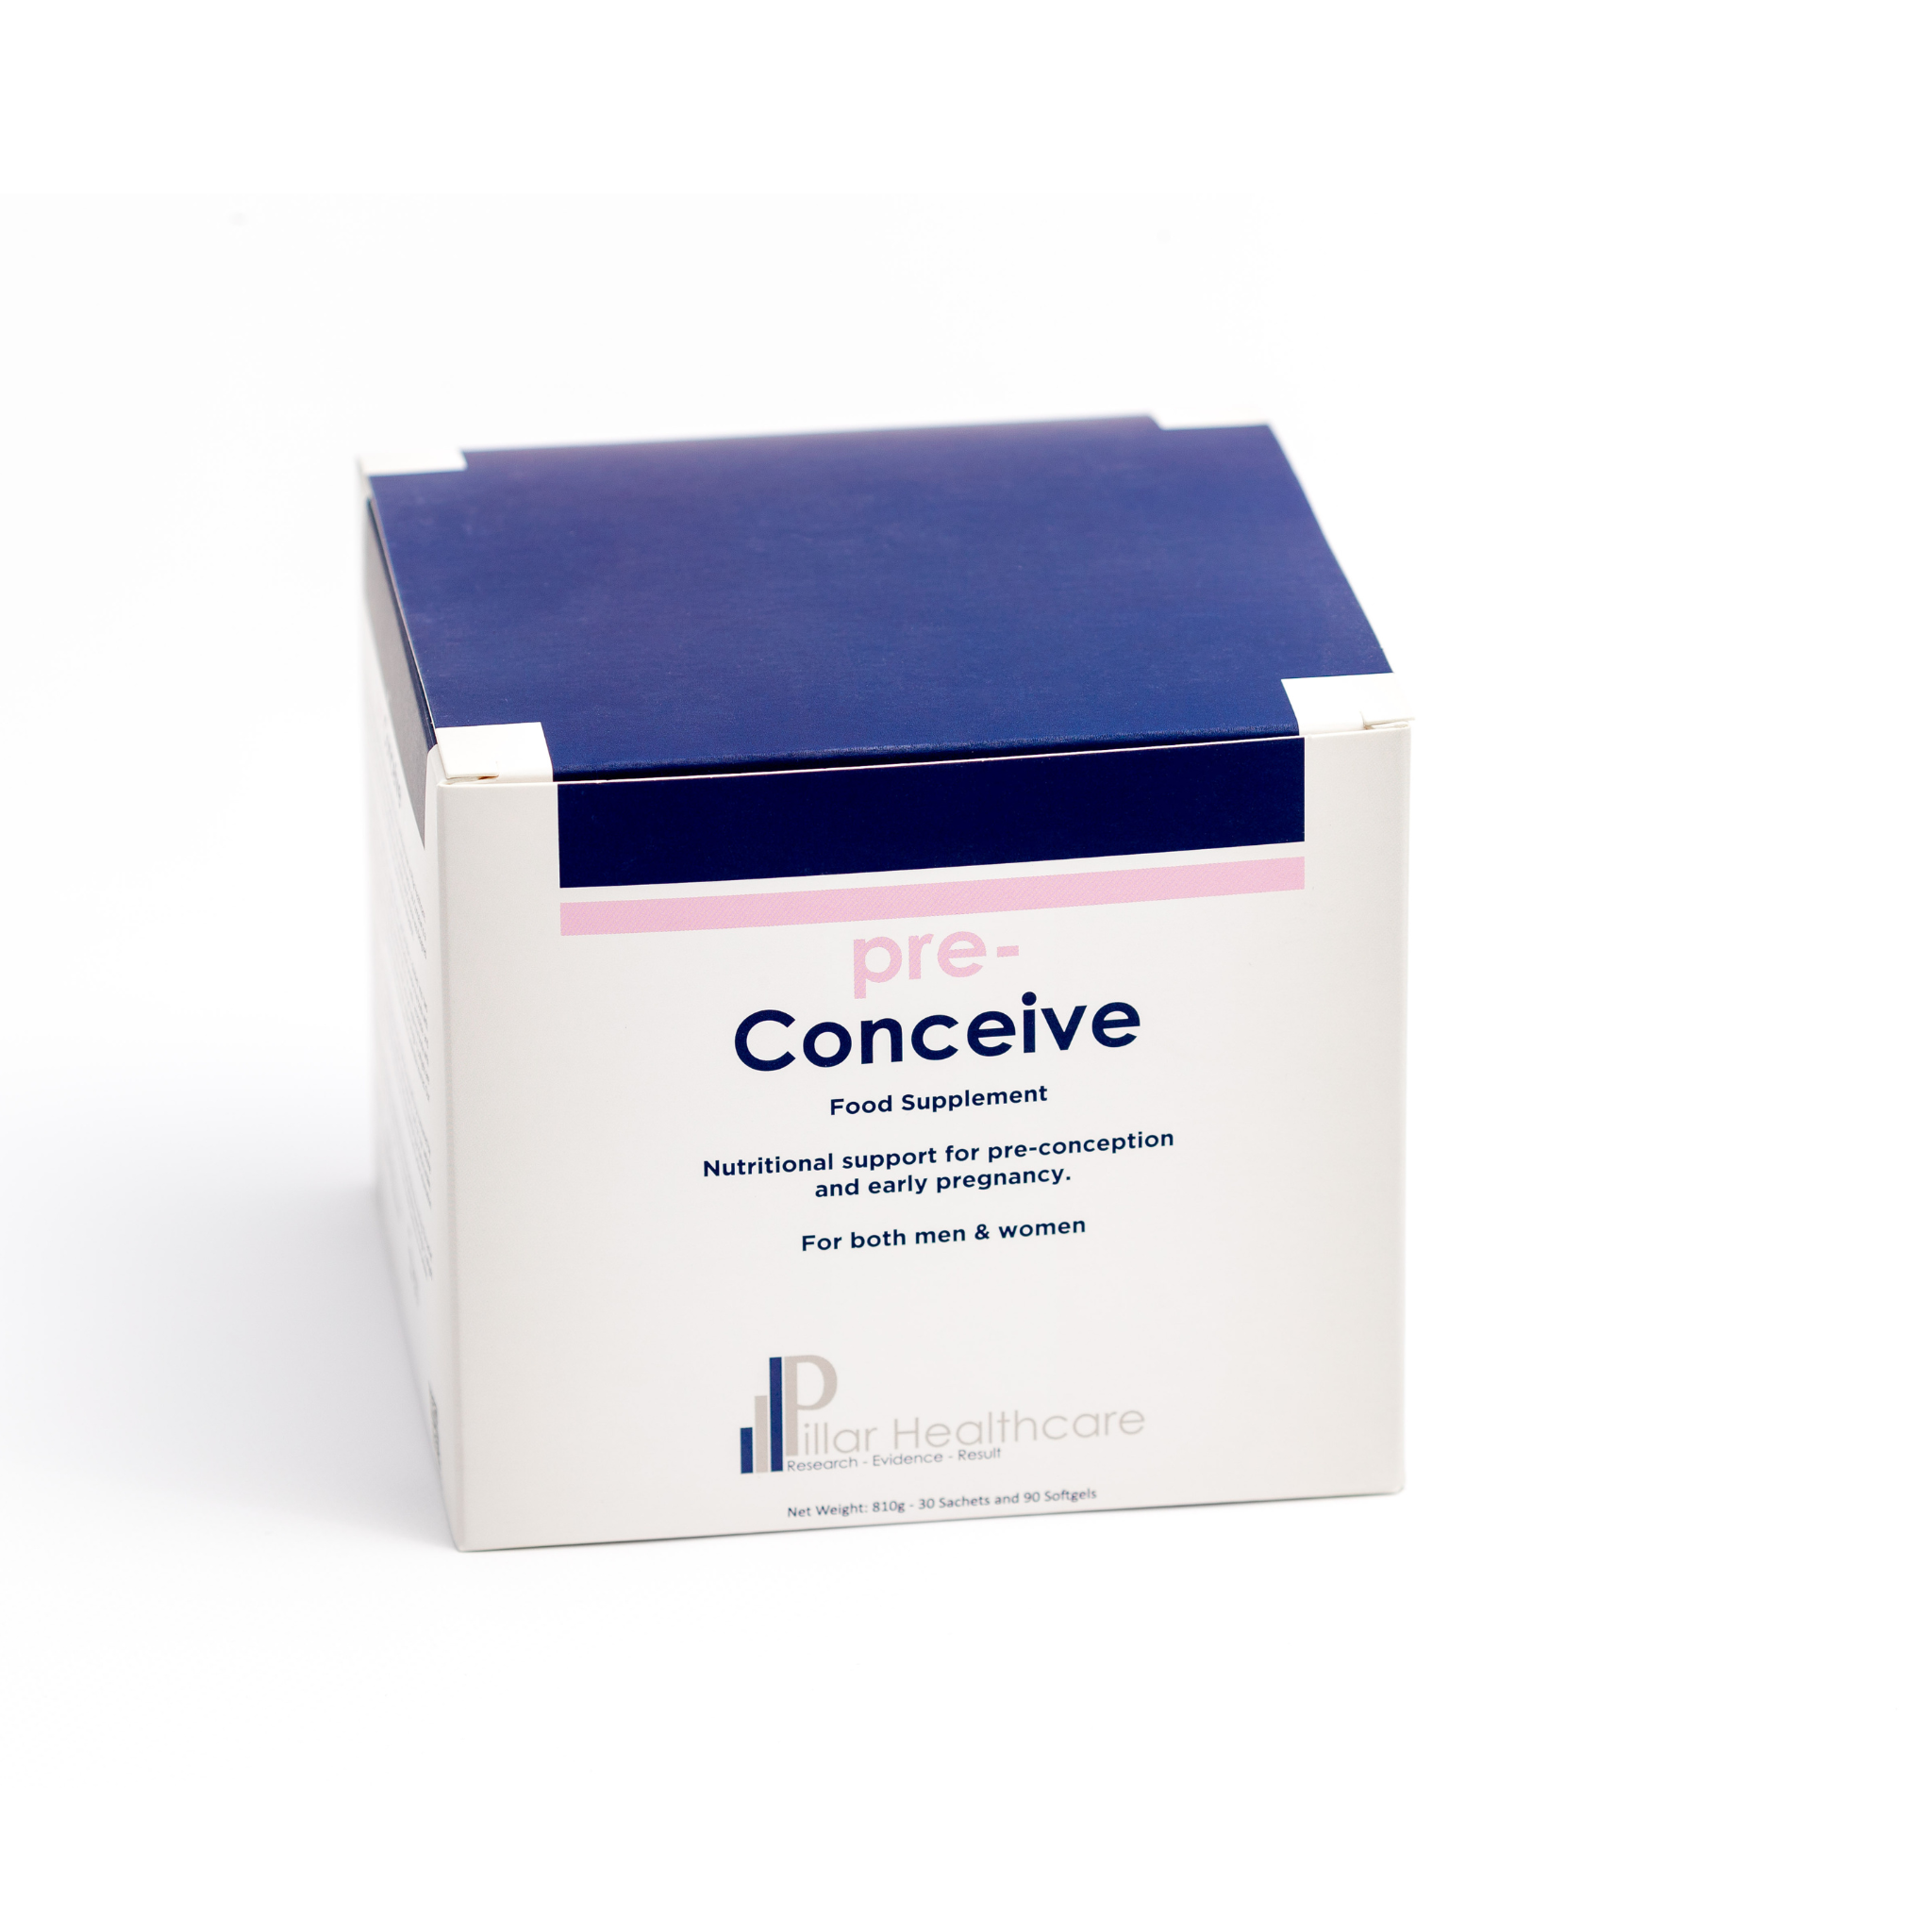 Improving Your Fertility's sister company's flagship product, pre-Conceive product image